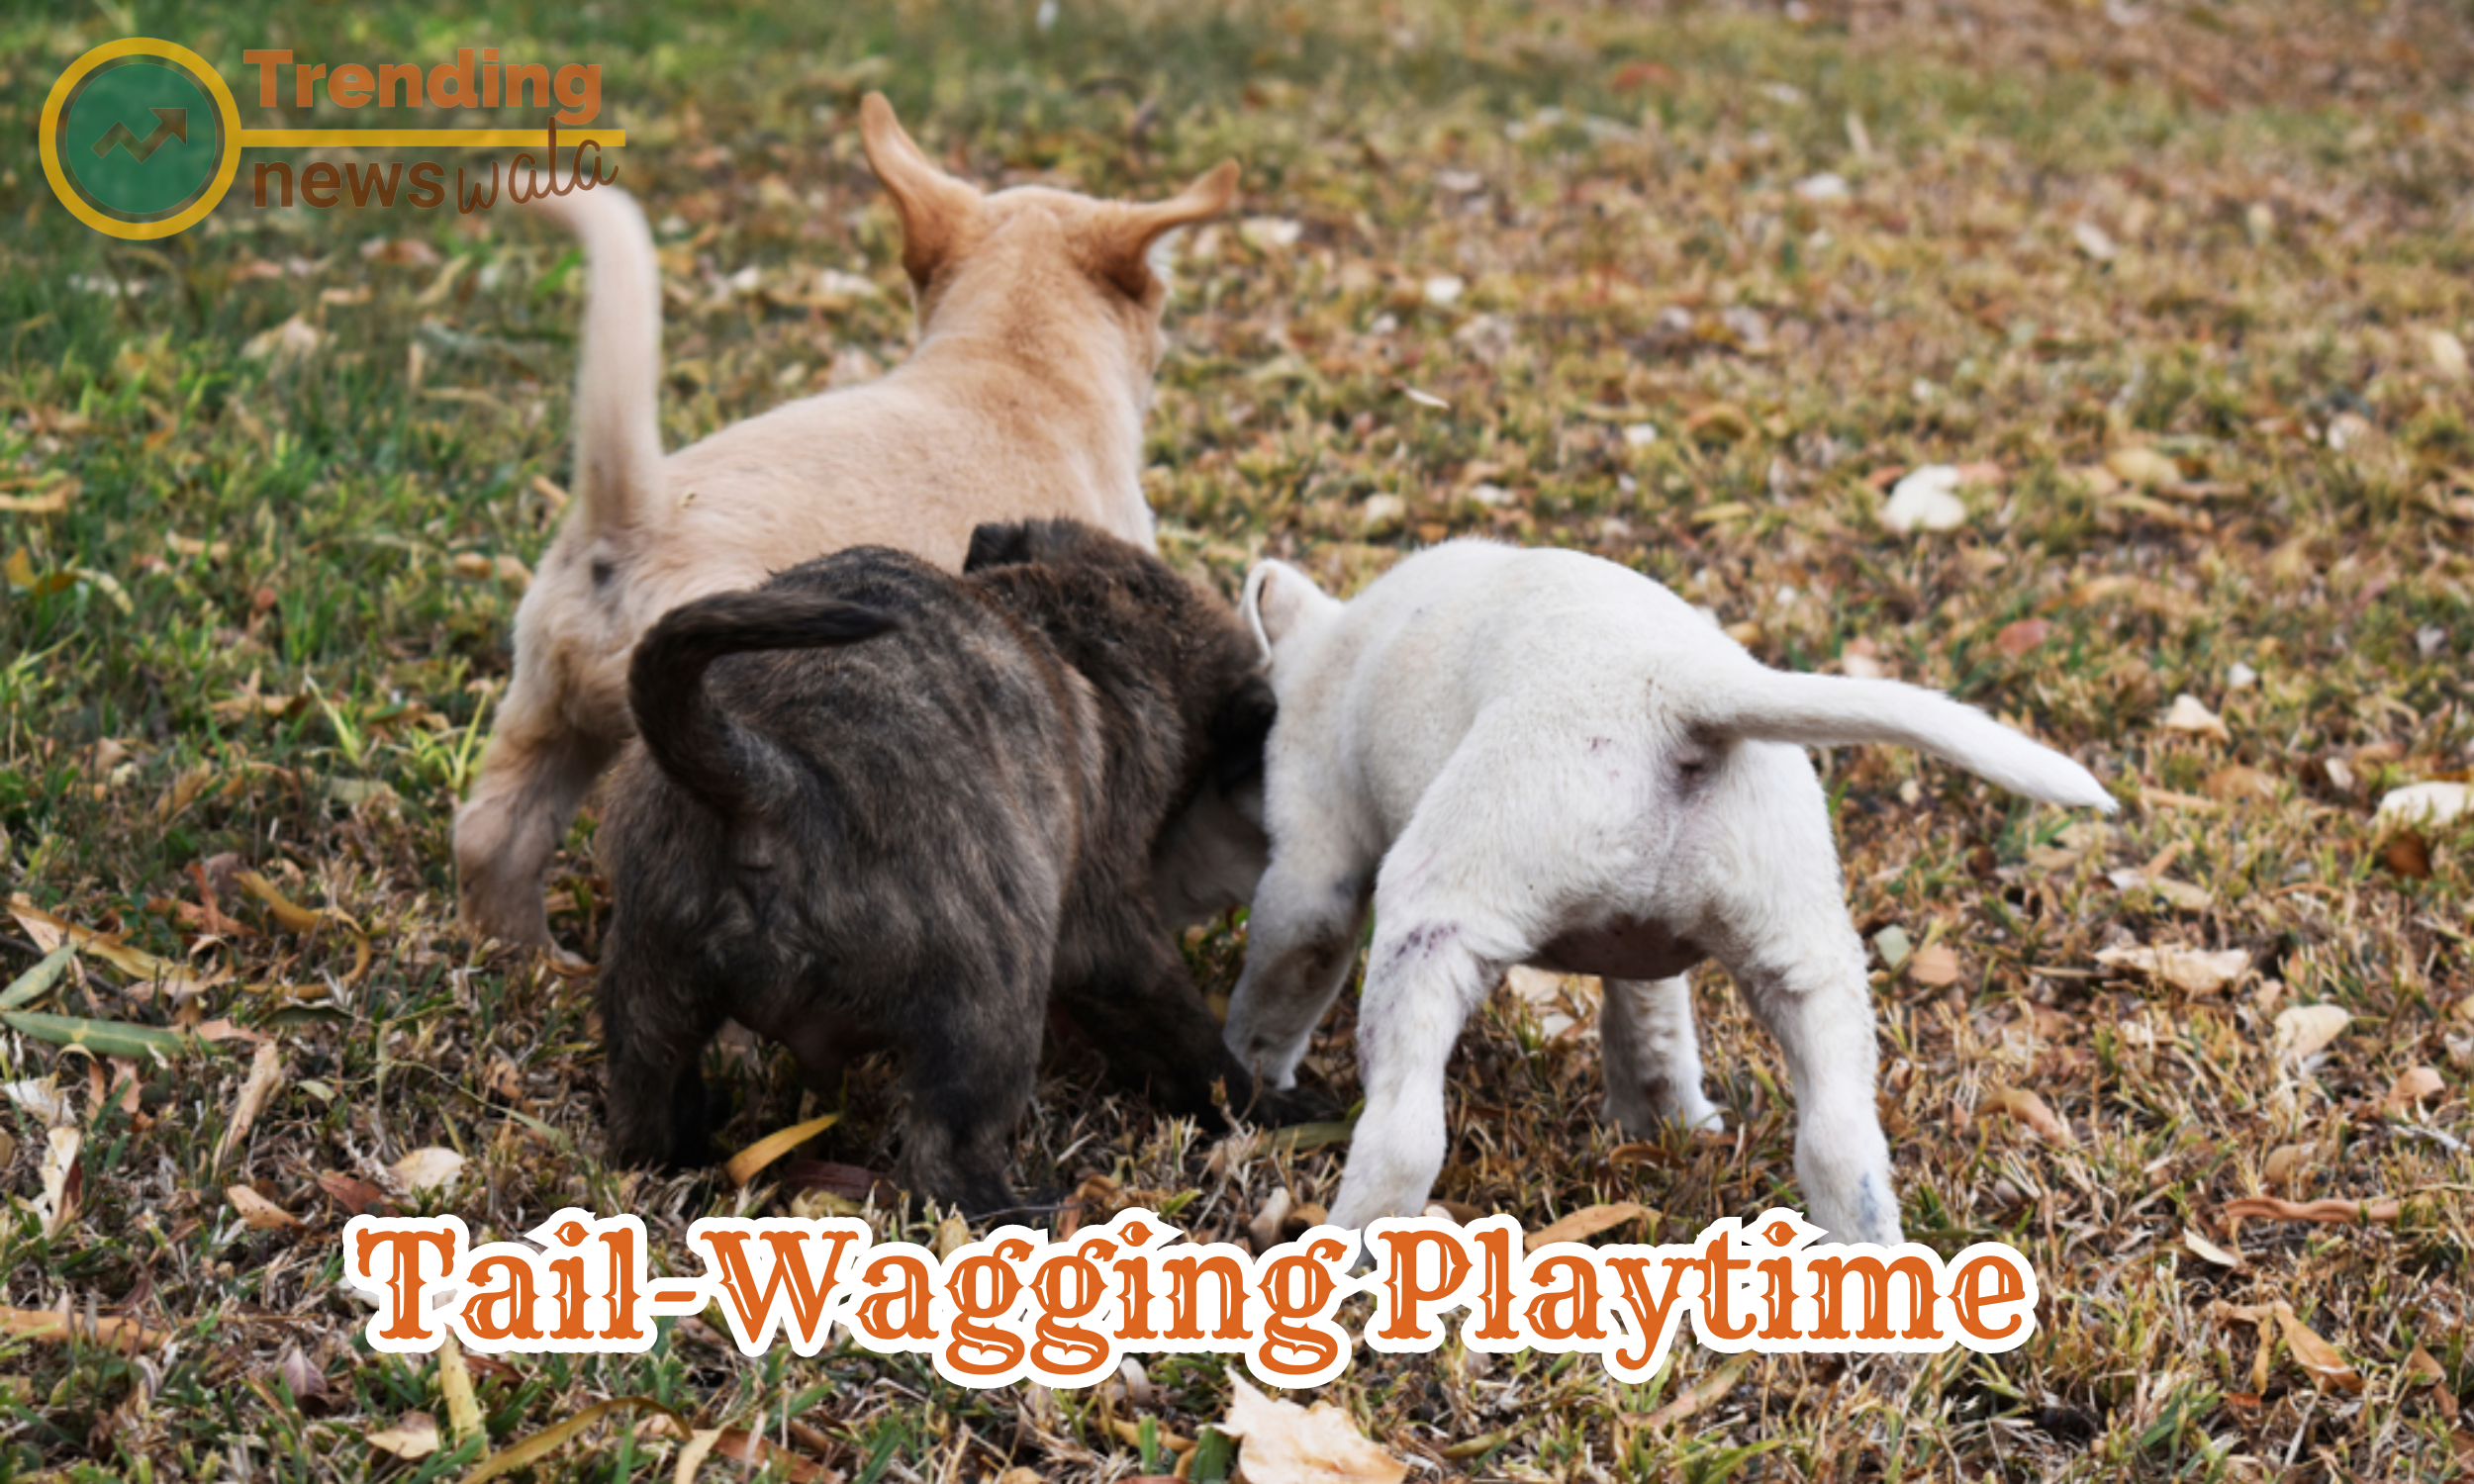 Tail-wagging playtime refers to interactive and enjoyable activities that engage dogs and bring